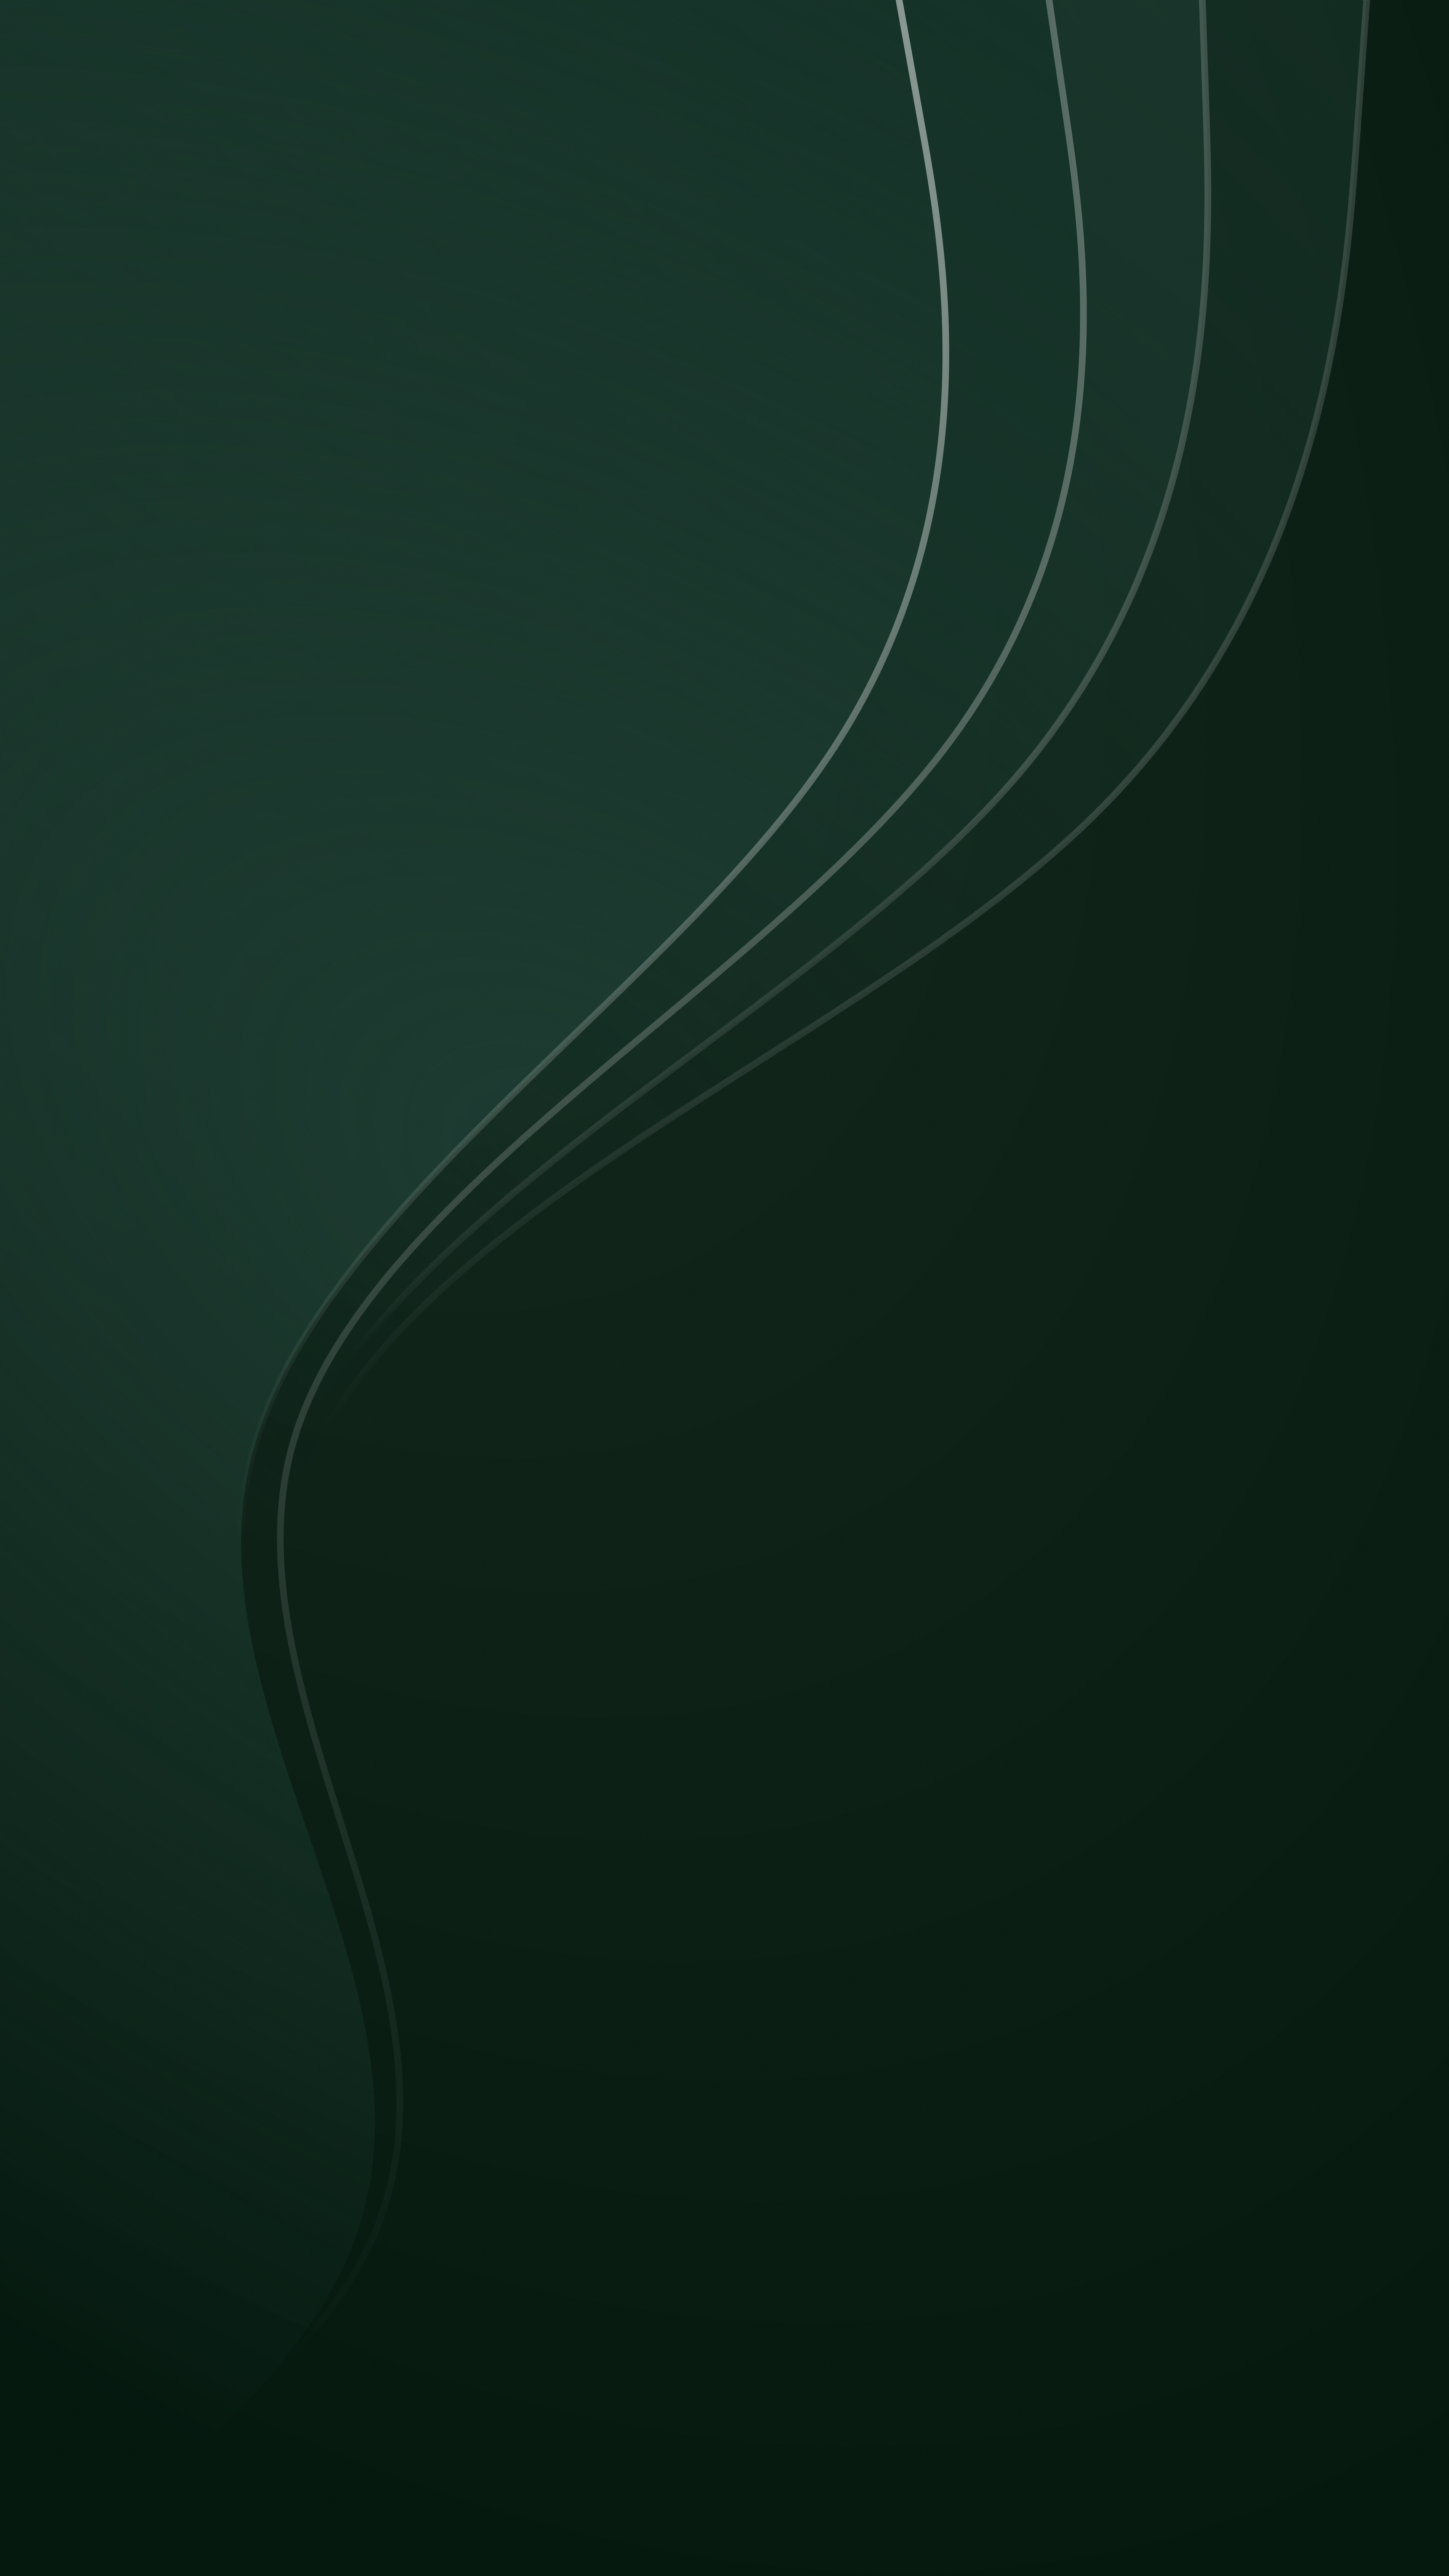 Green Wavy Lines Abstract Simple Background 4320x7680